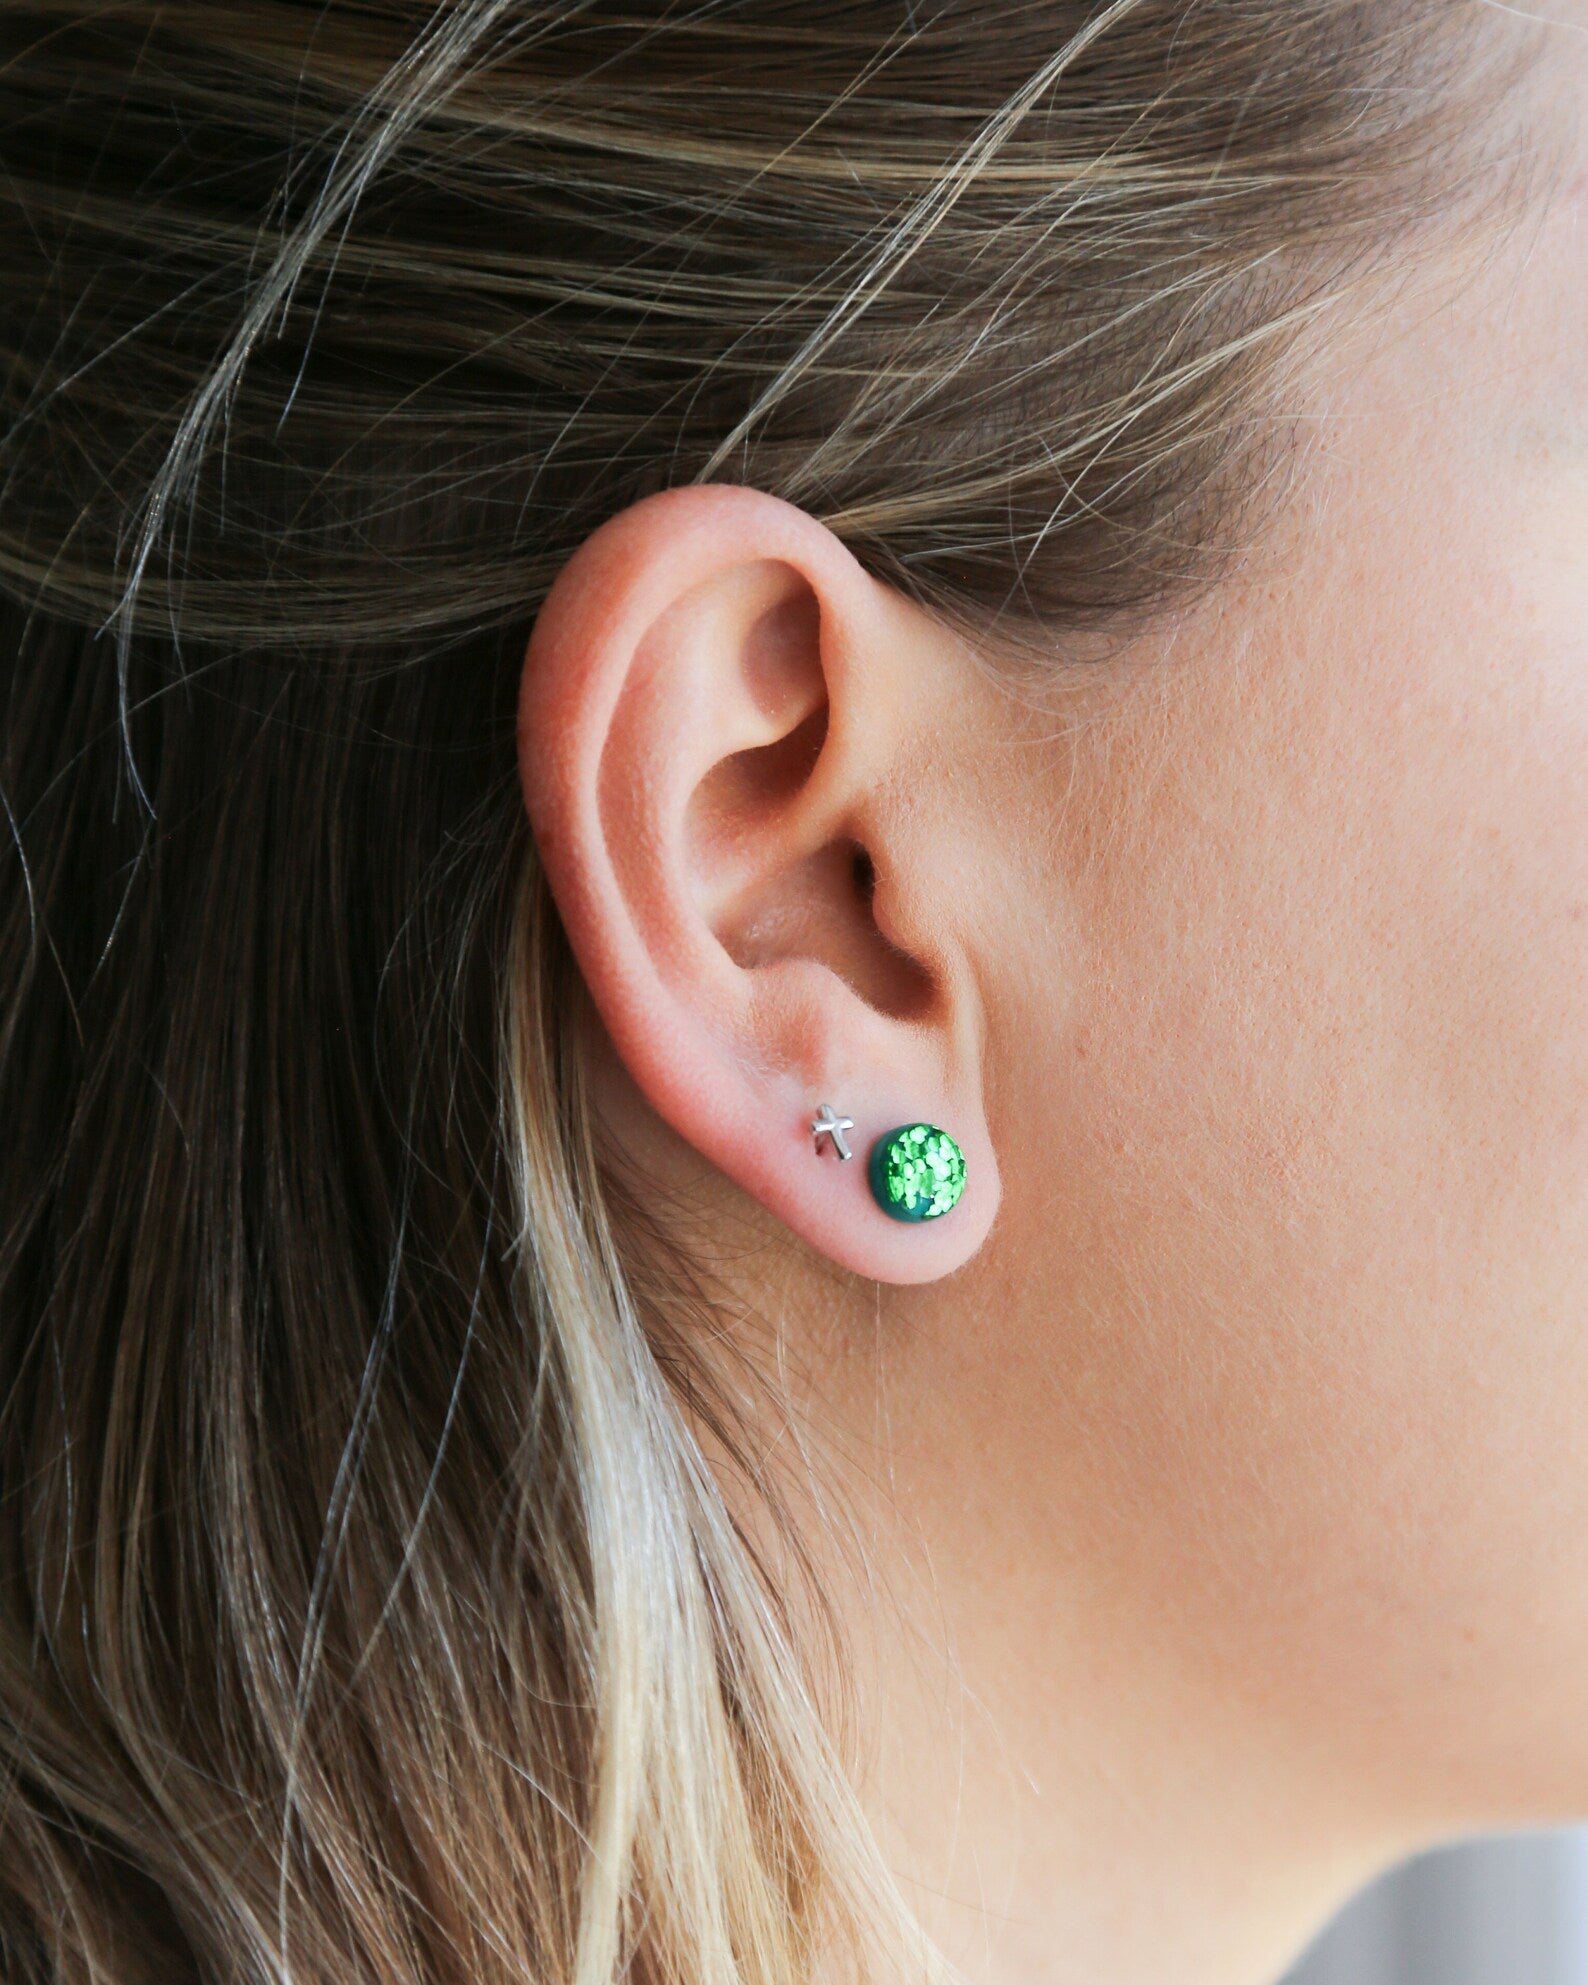 Emerald green studs with surgical steel posts, Handmade jewelry